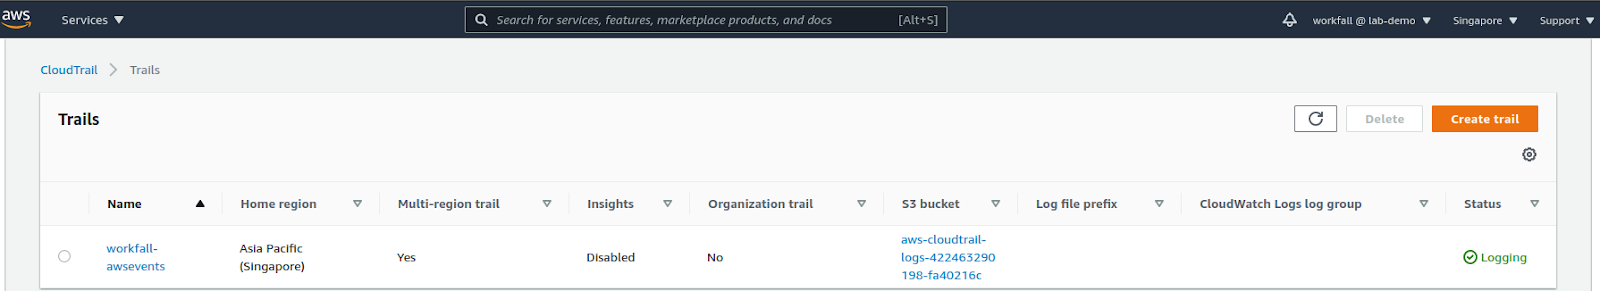 How to track AWS account activities using AWS CloudTrail?